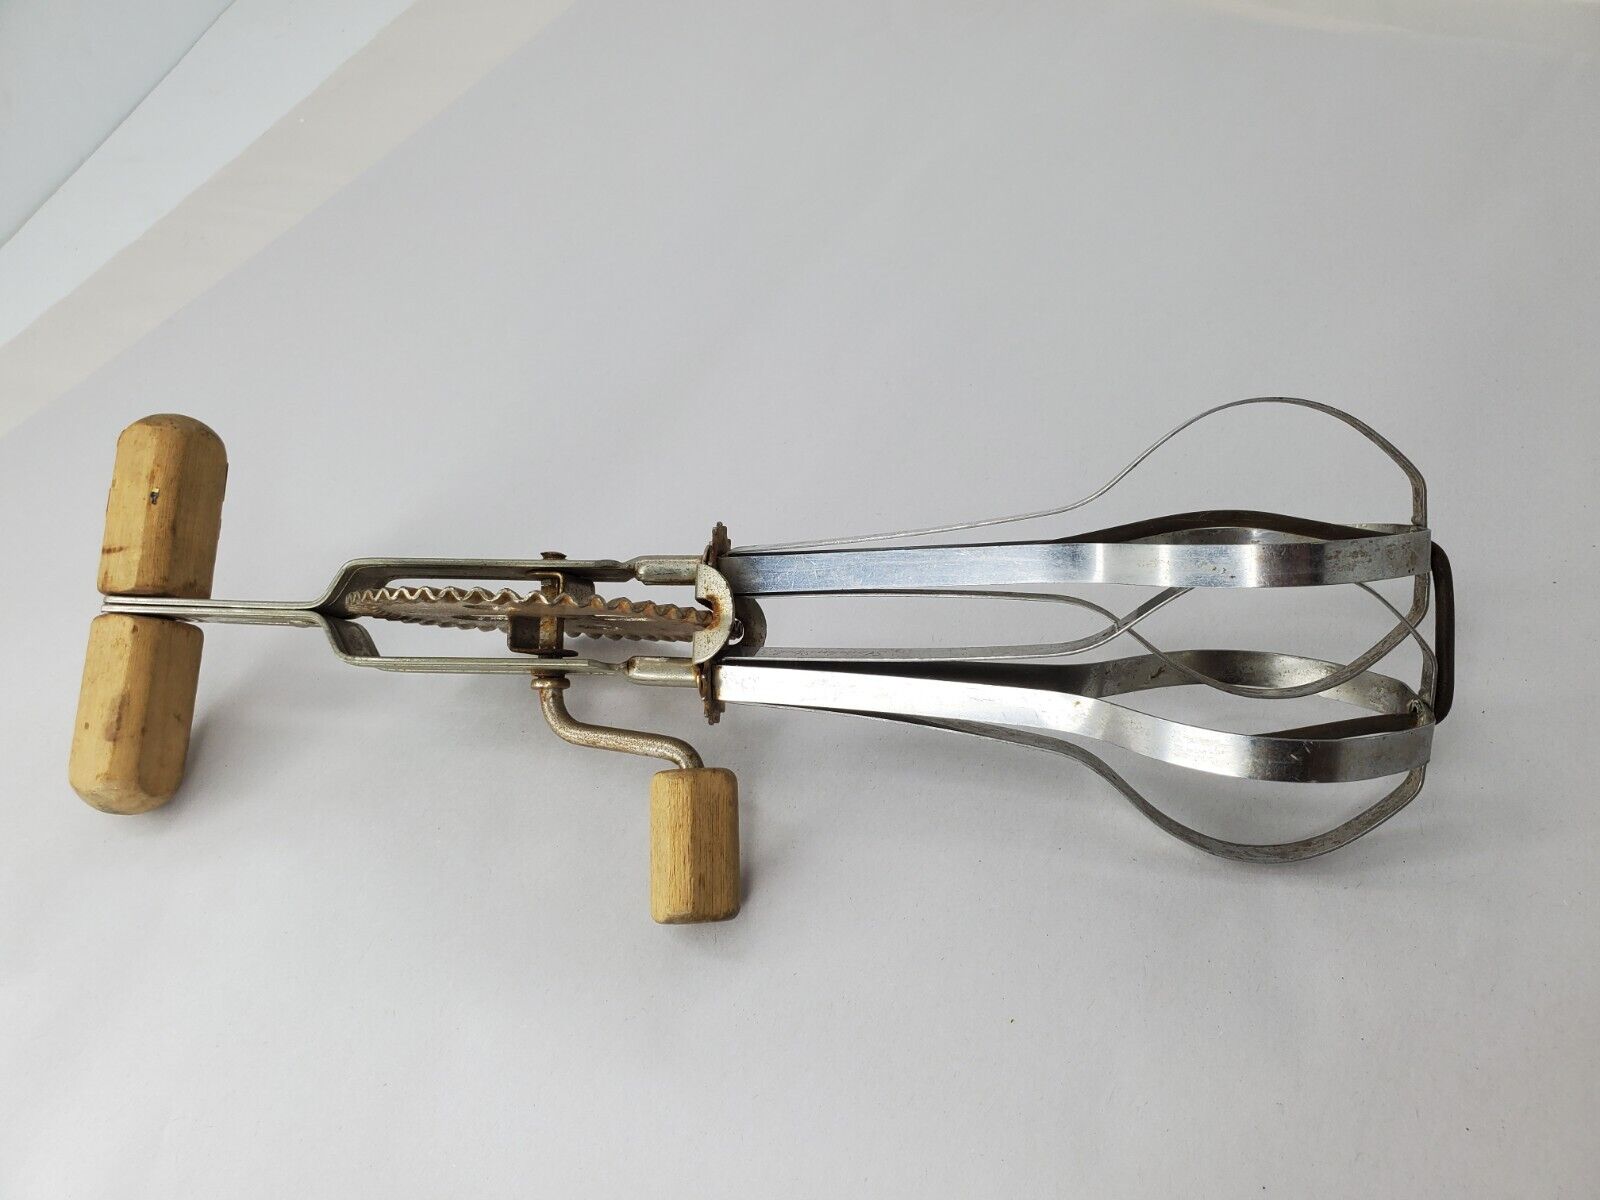 Antique Egg Beater Hand Mixer Wood Handle Crank Stainless Steel